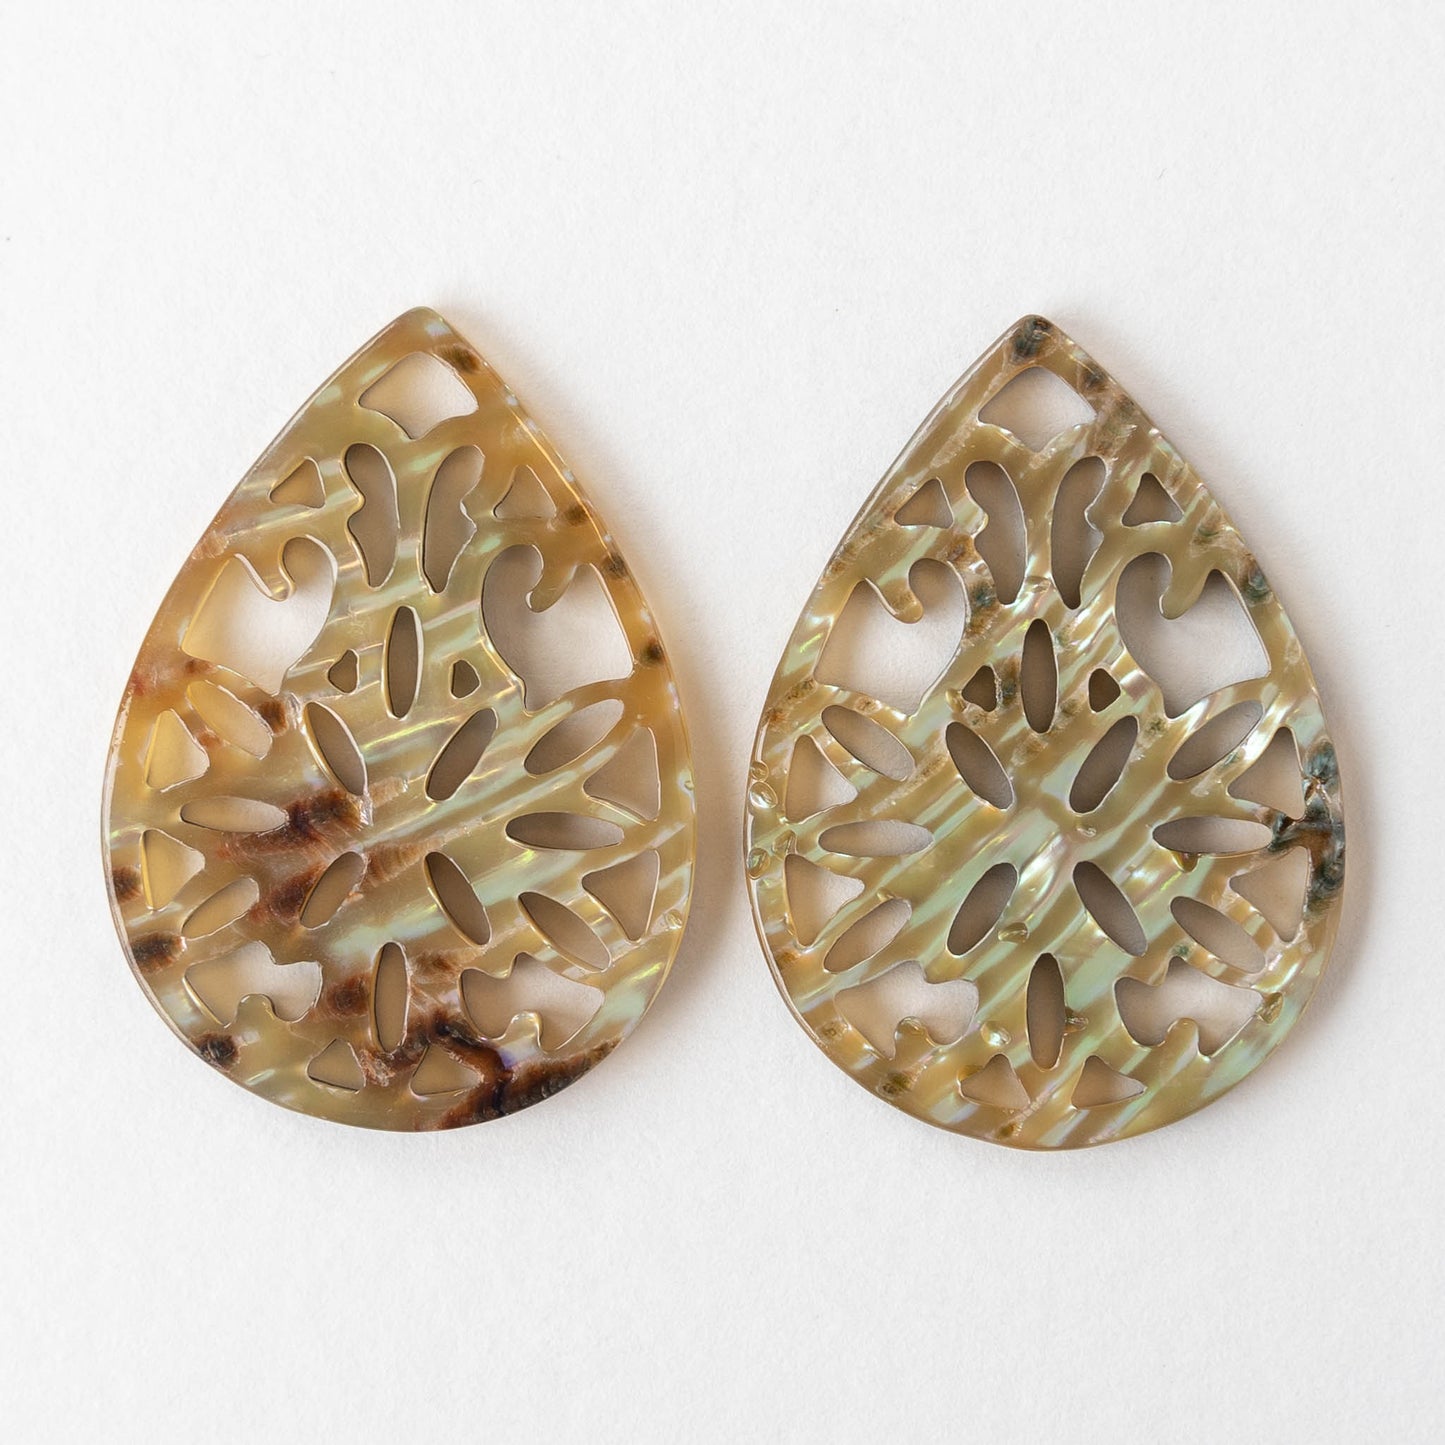 25x35mm Carved Abalone Teardrop Shell Pendants - 1 Pair